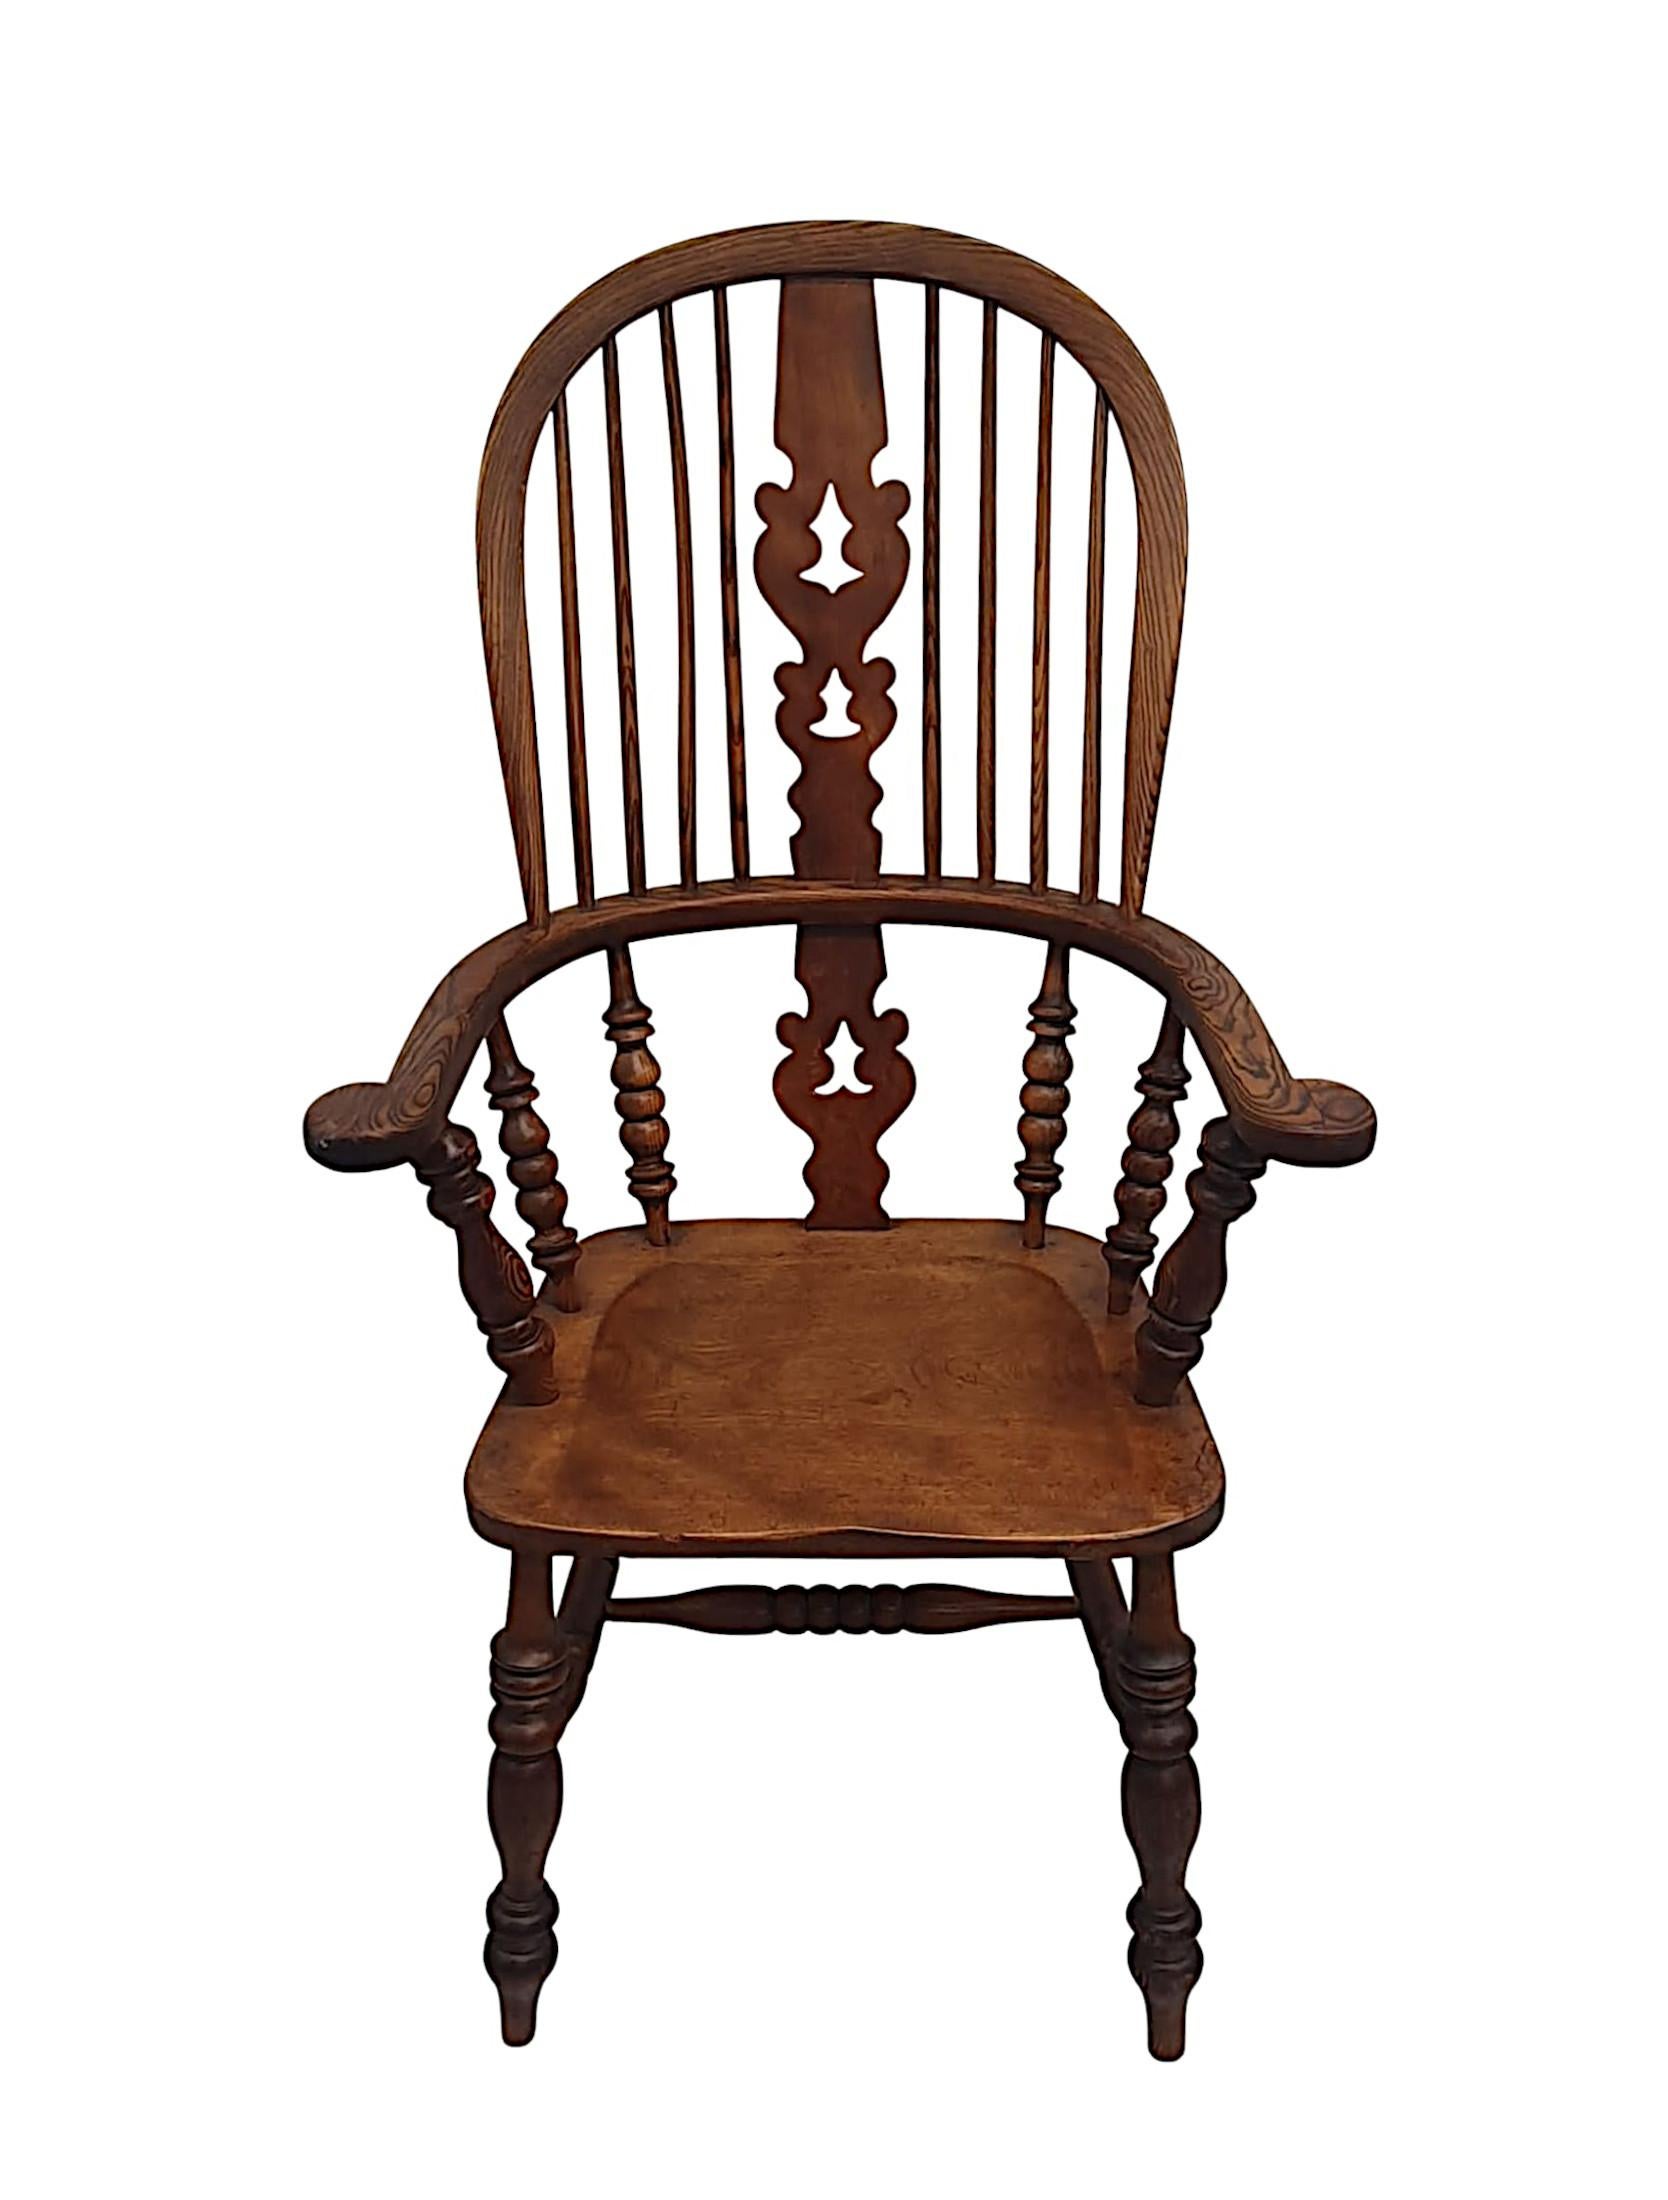 English Rare 19th Century Broad Arm Windsor Armchair For Sale